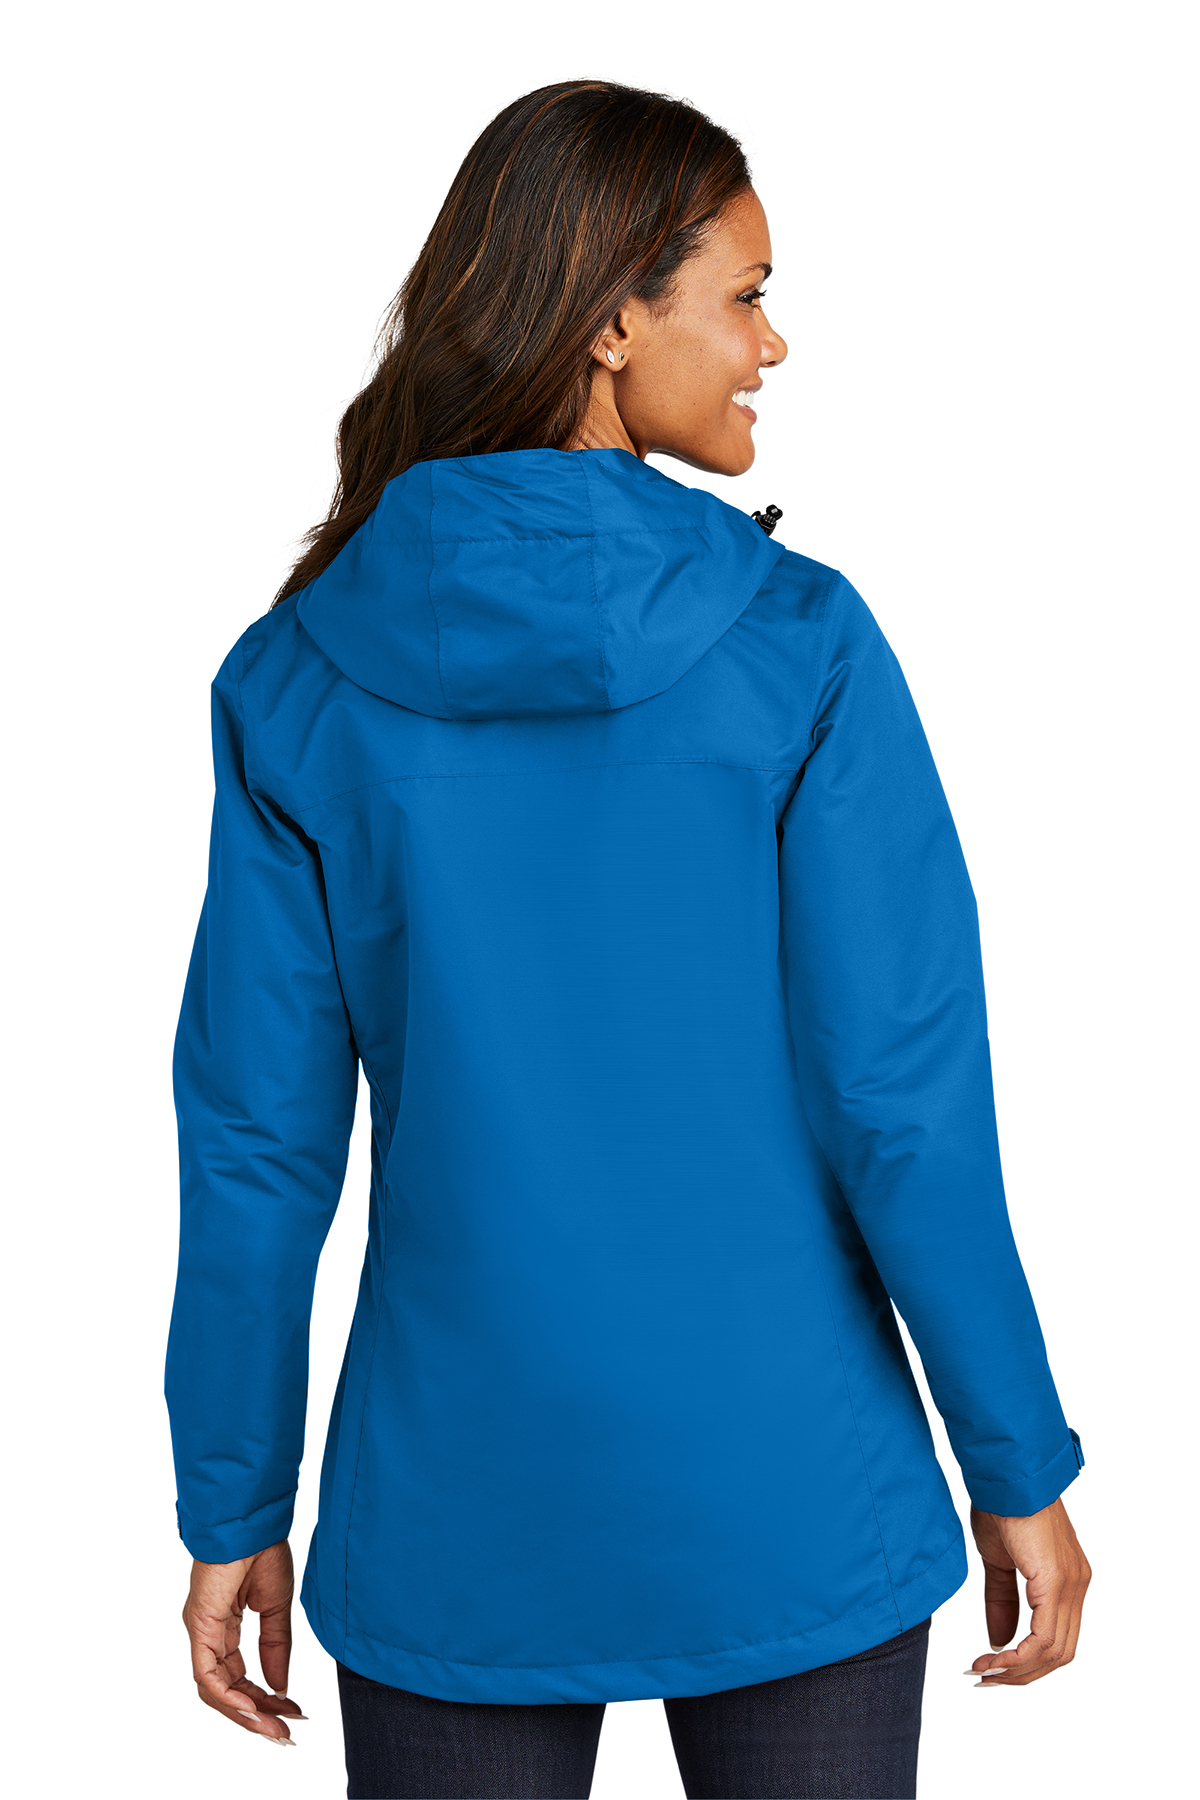 Port Authority Ladies SanMar | Jacket Product | All-Conditions